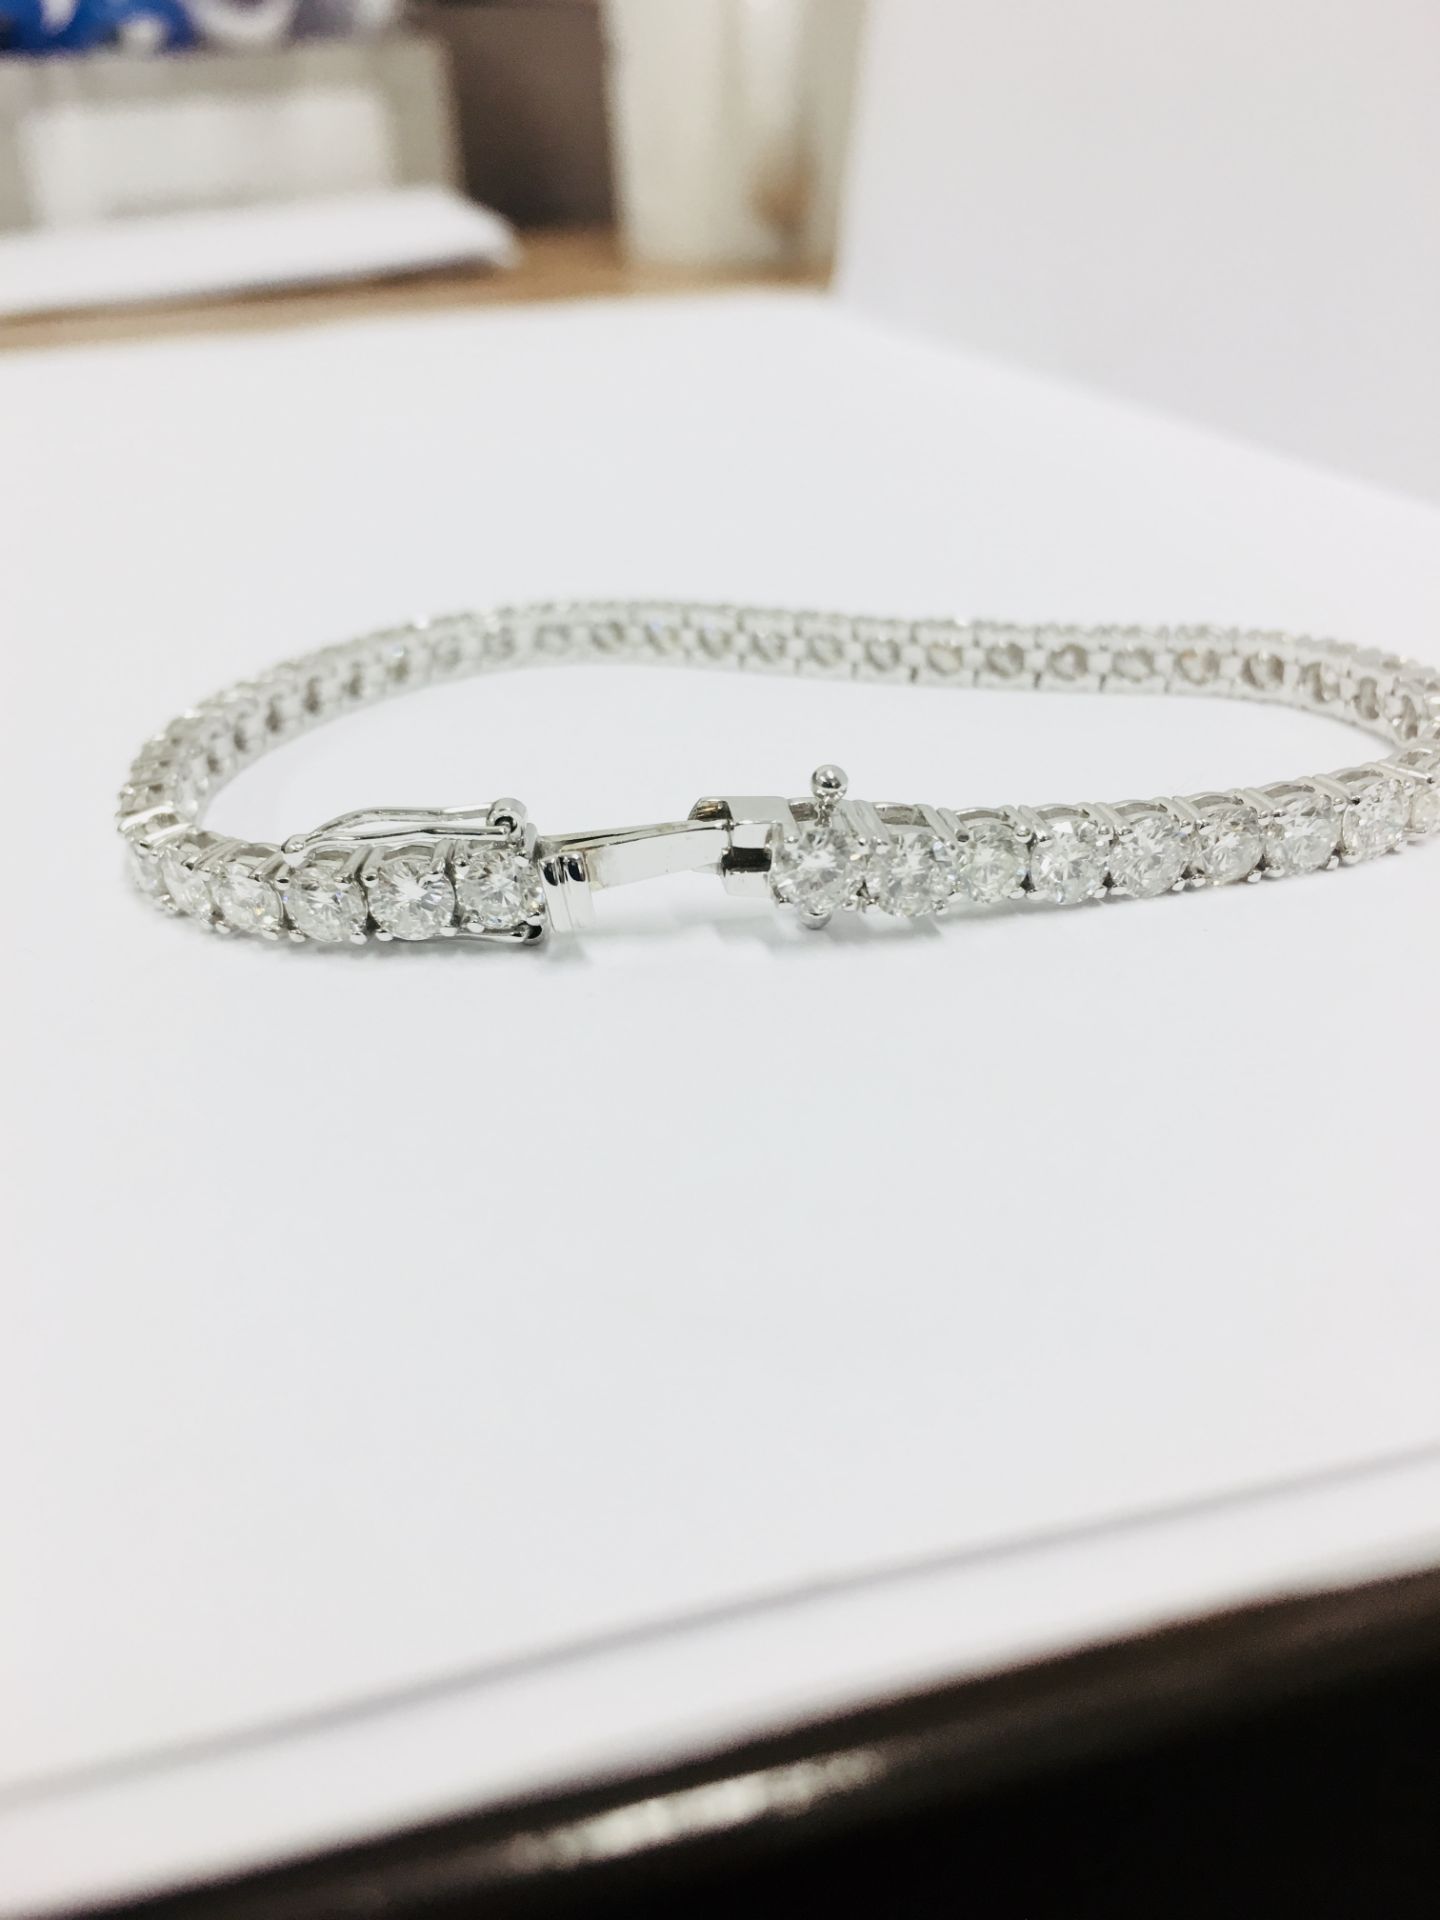 10.50ct Diamond tennis bracelet set with brilliant cut diamonds of I colour, si2 clarity. All set in - Image 2 of 7